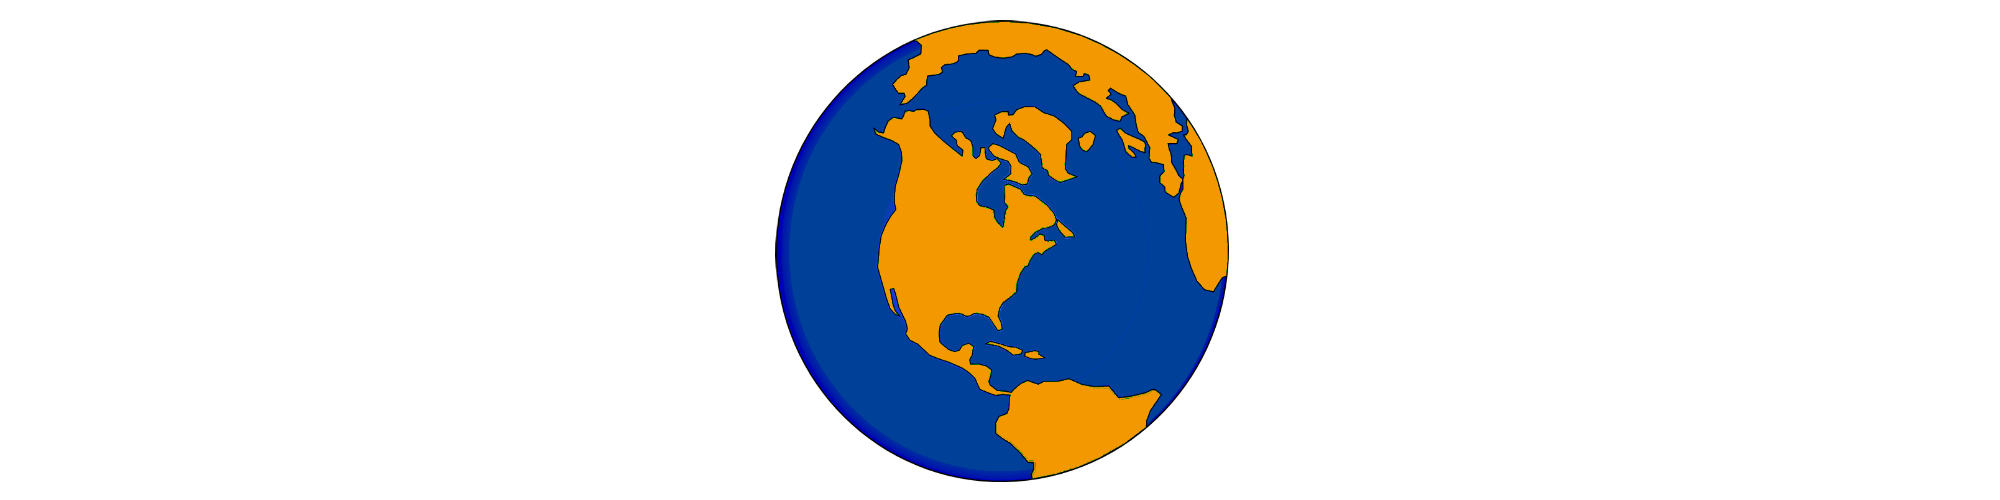  Click here for the globe icon in orange and blue colors